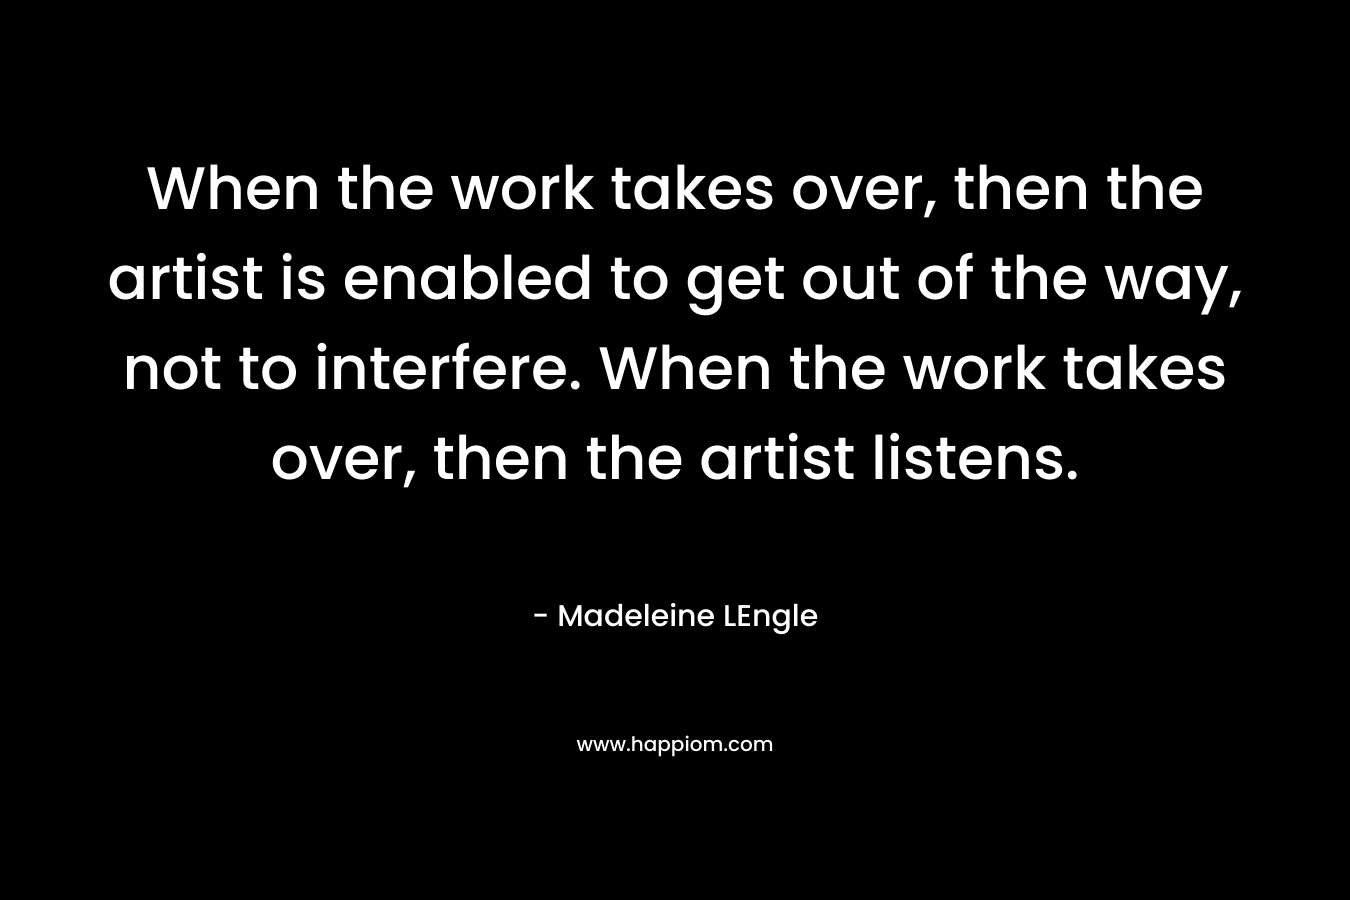 When the work takes over, then the artist is enabled to get out of the way, not to interfere. When the work takes over, then the artist listens. – Madeleine LEngle